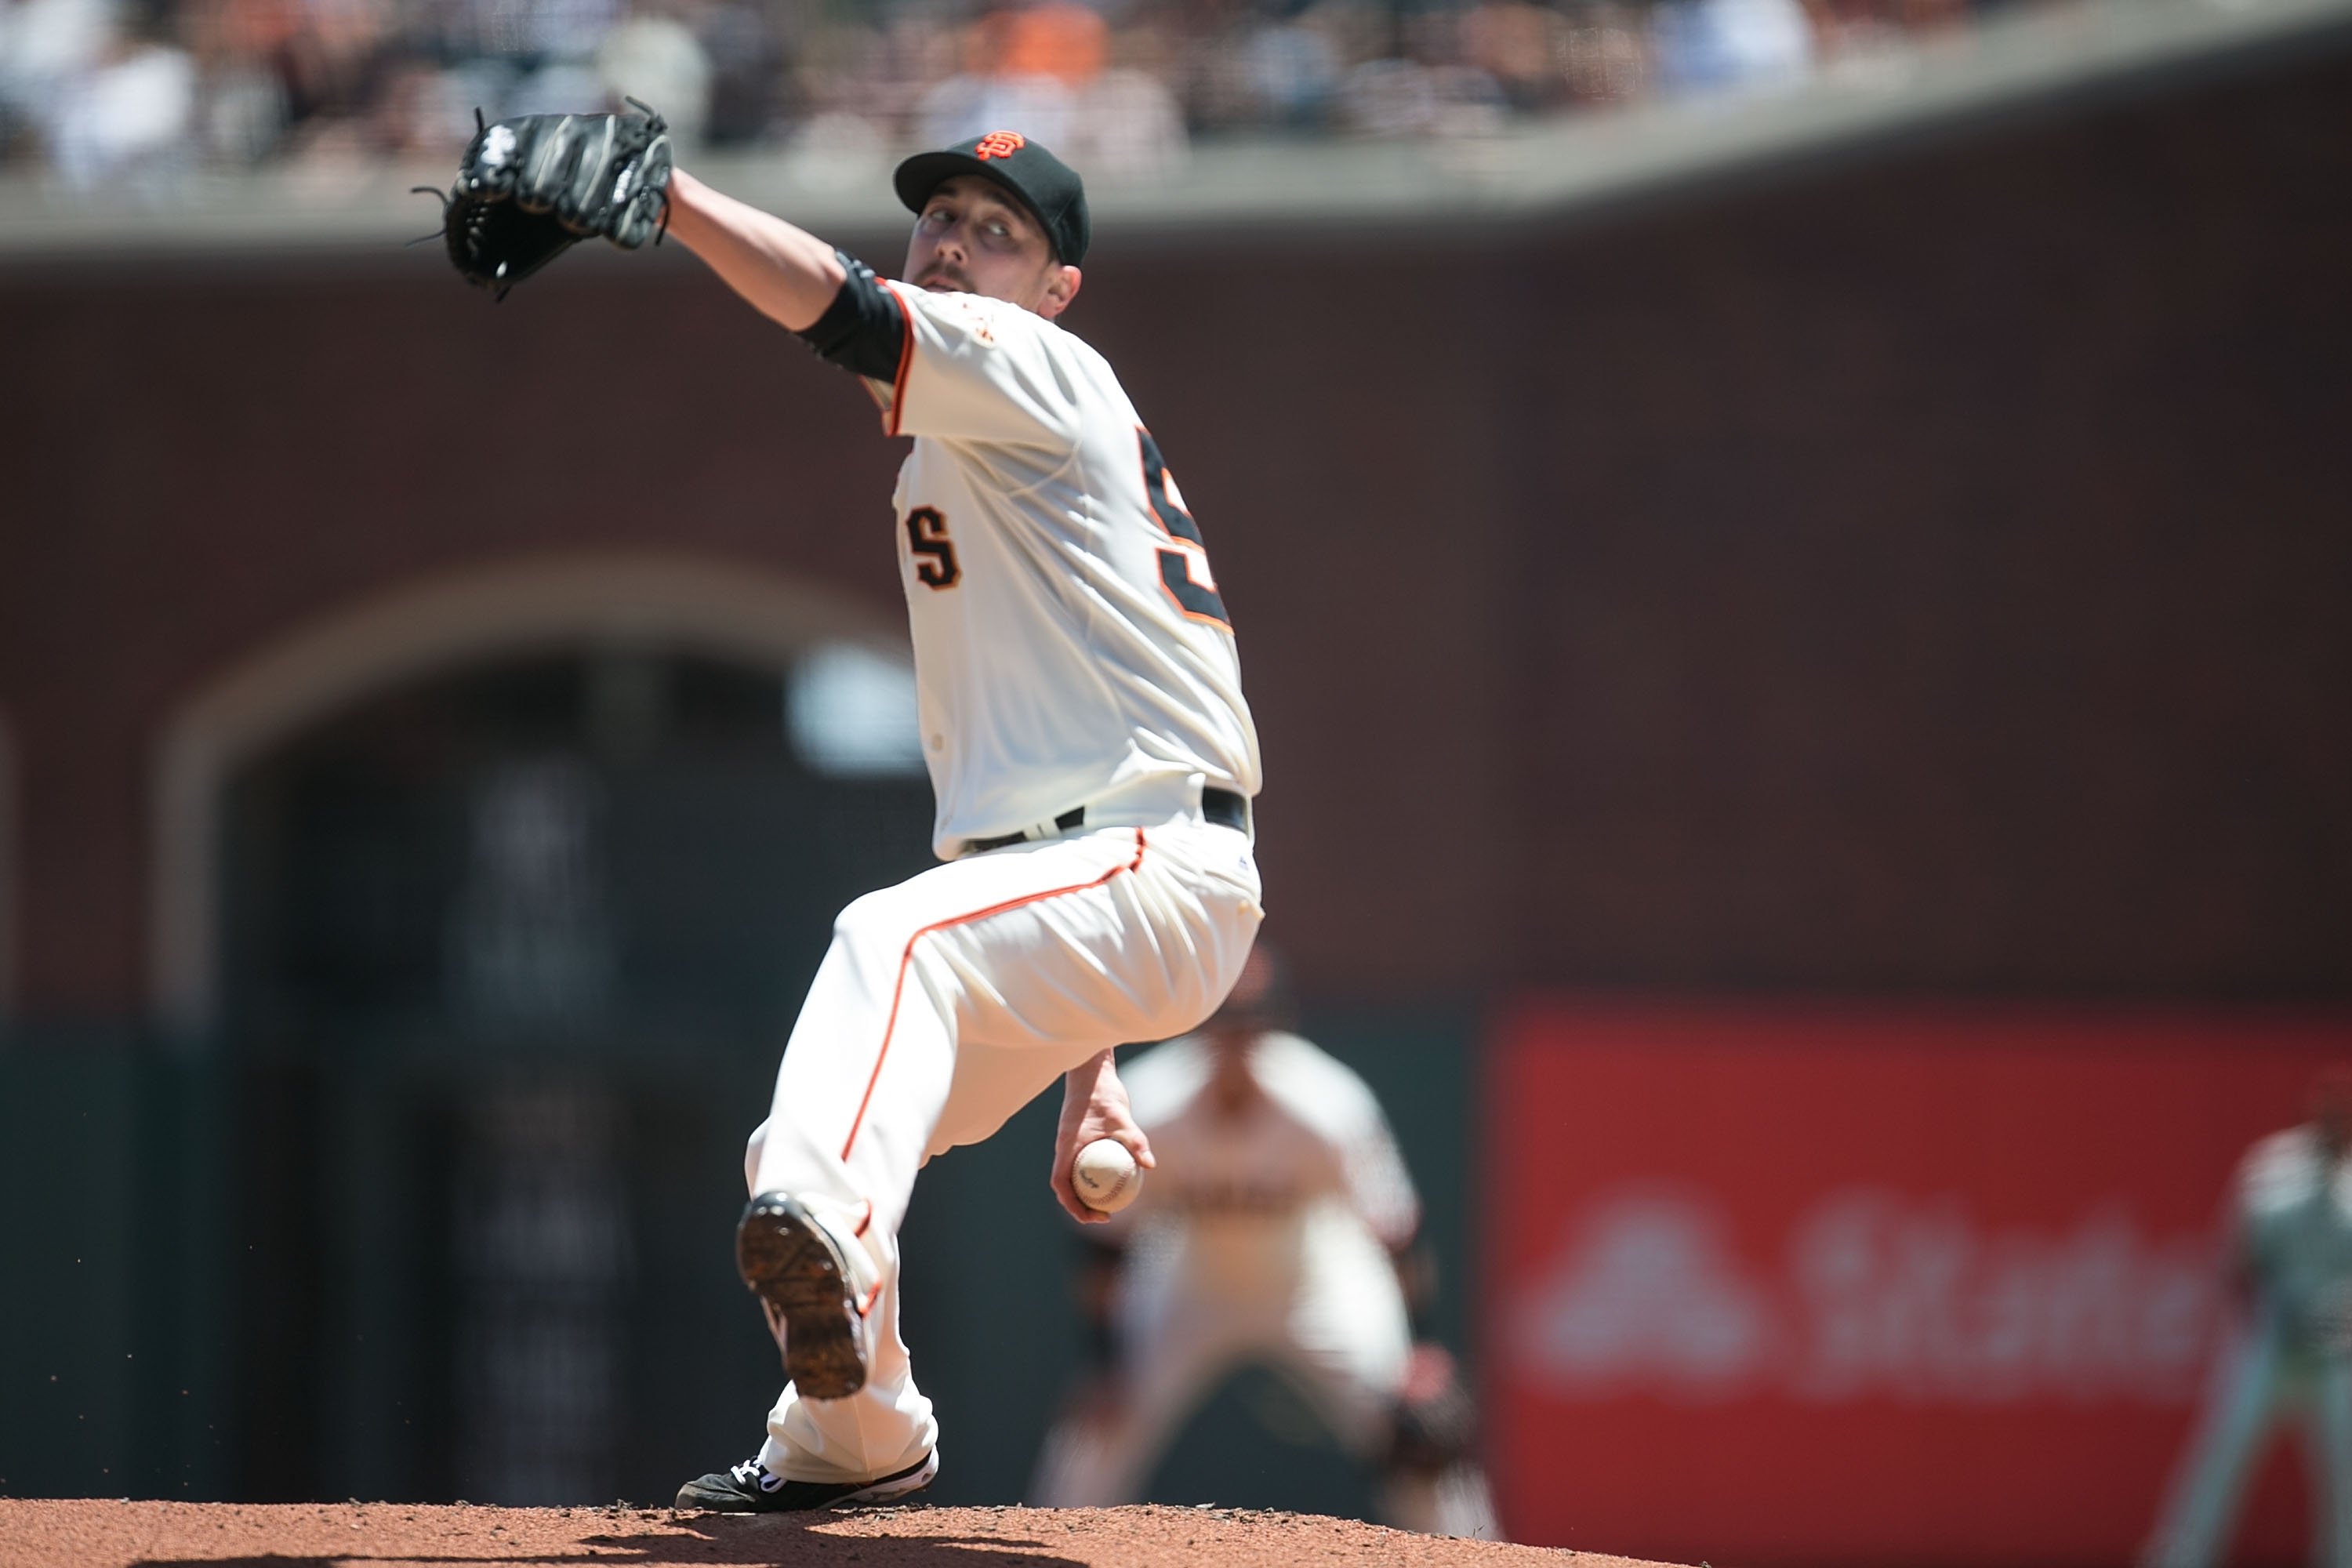 Giants spring training: Lincecum looking like a starter under